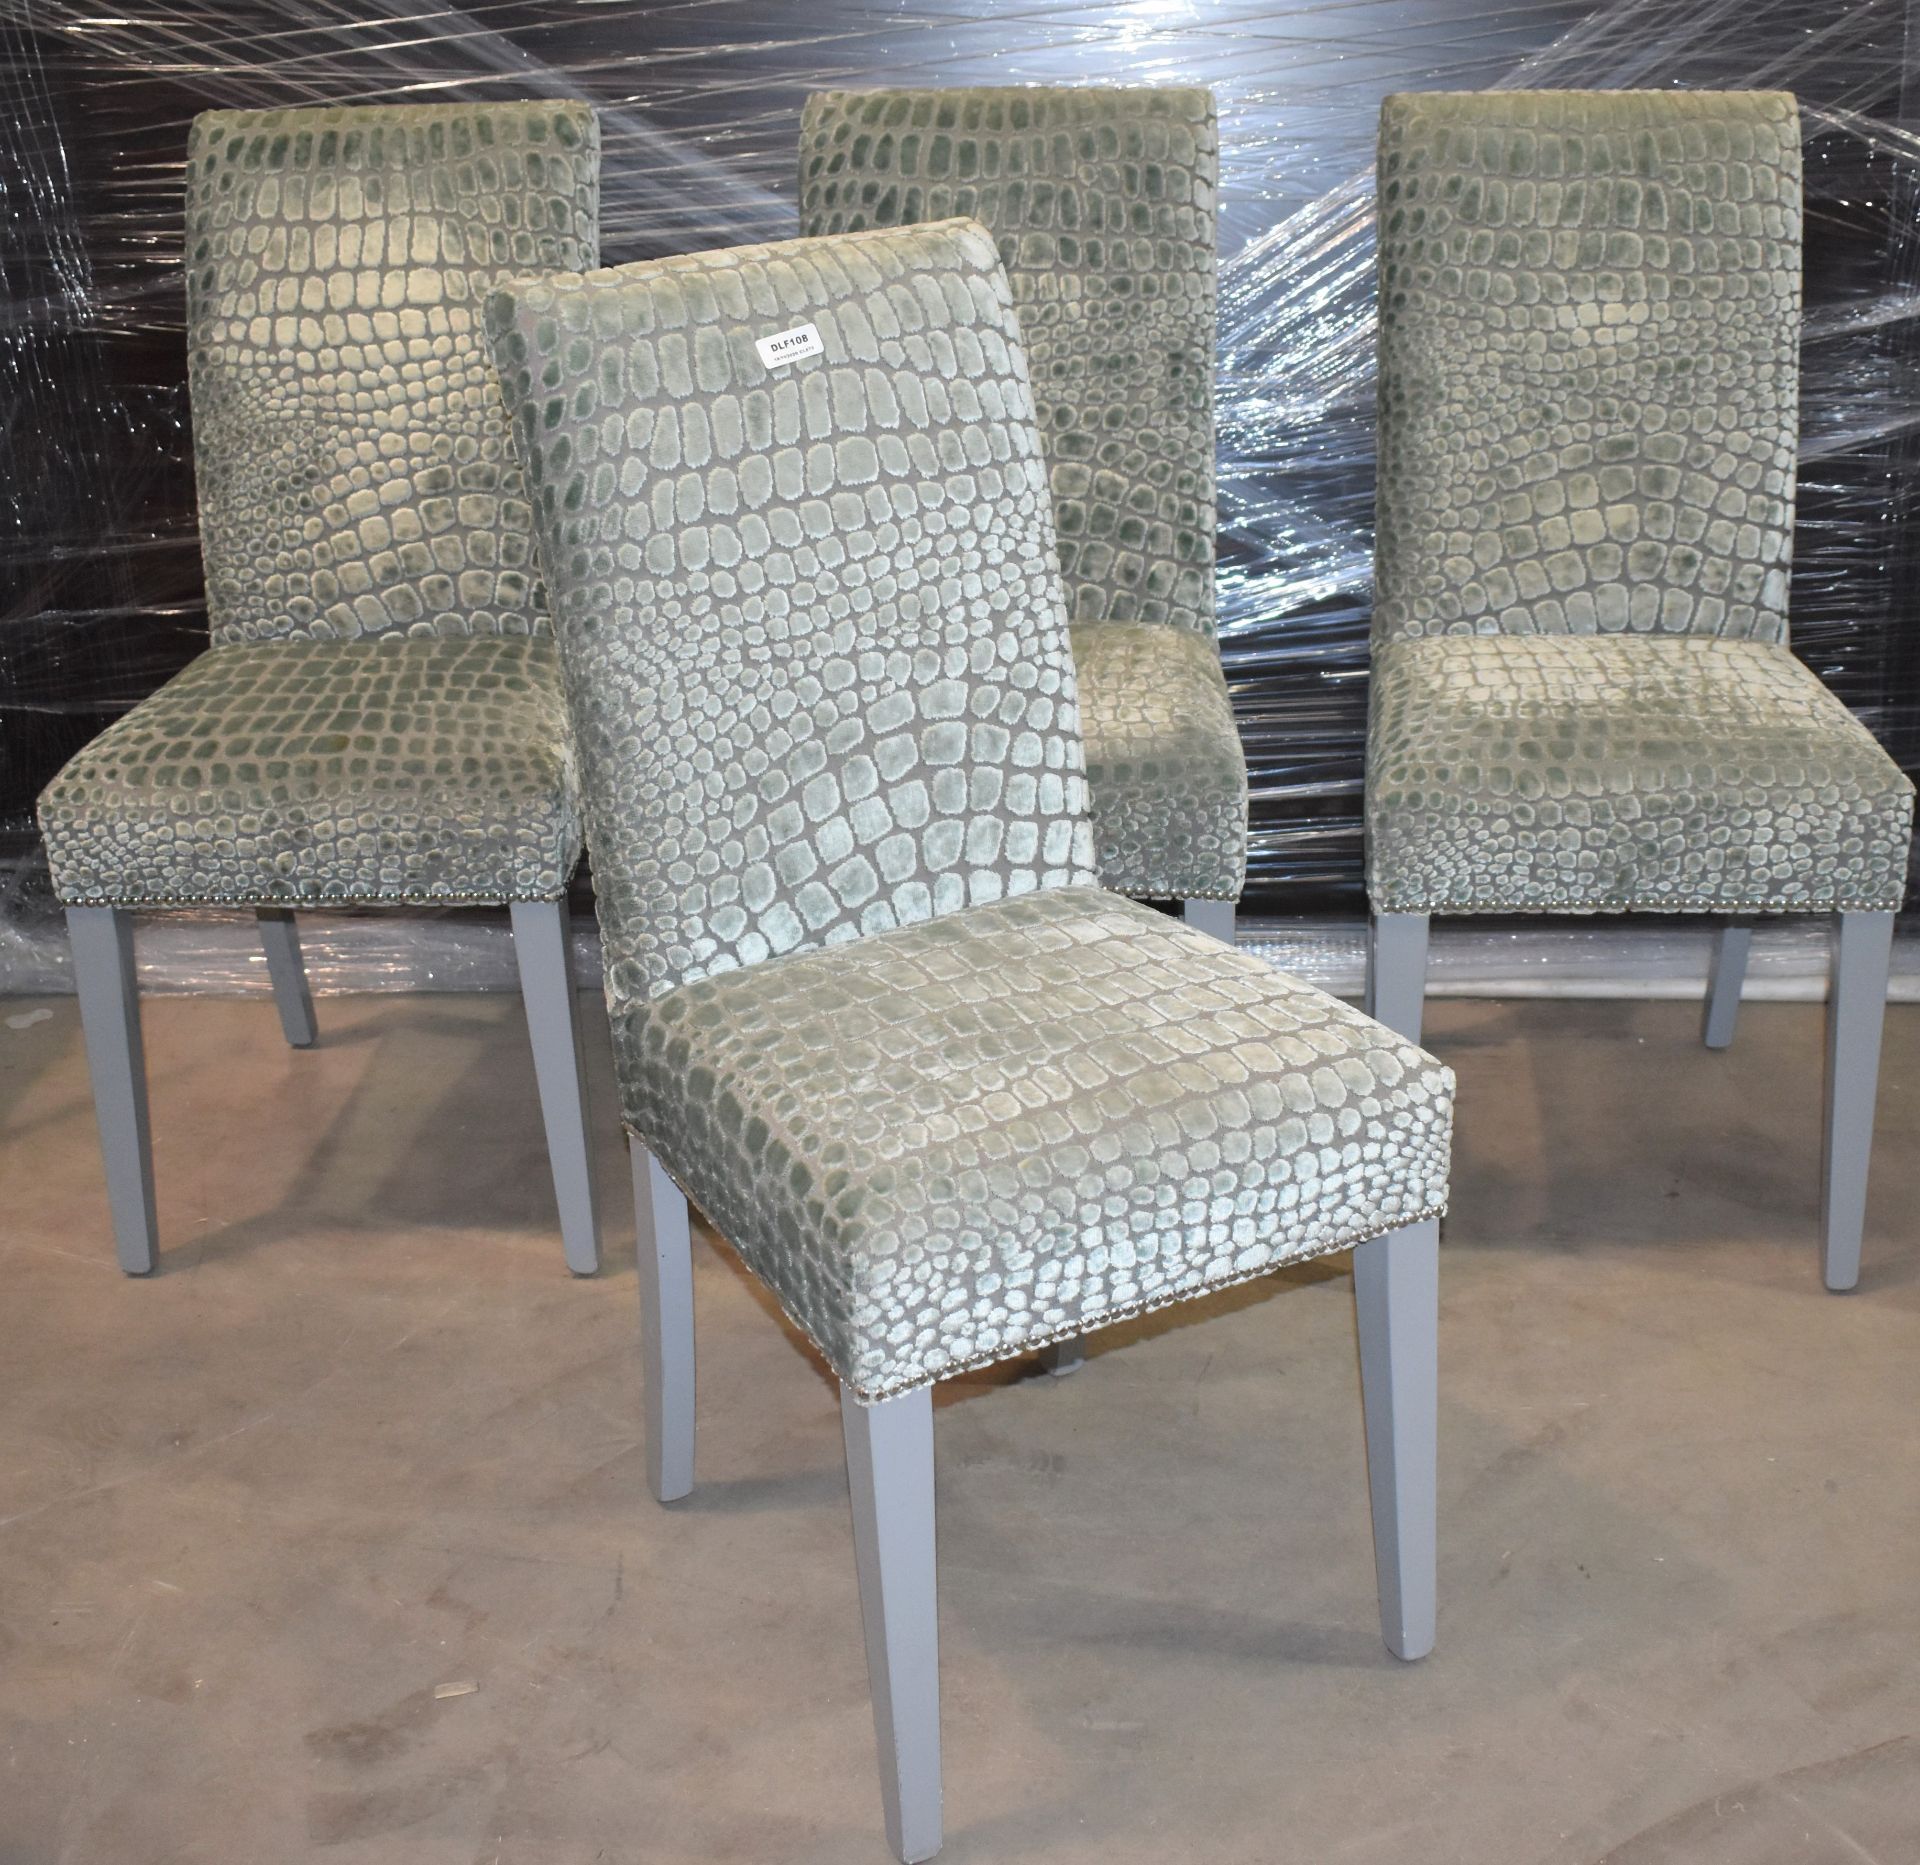 Set of Four Contemporary High Back Chairs With Reptile Skin Style Fabric Upholstery and Grey